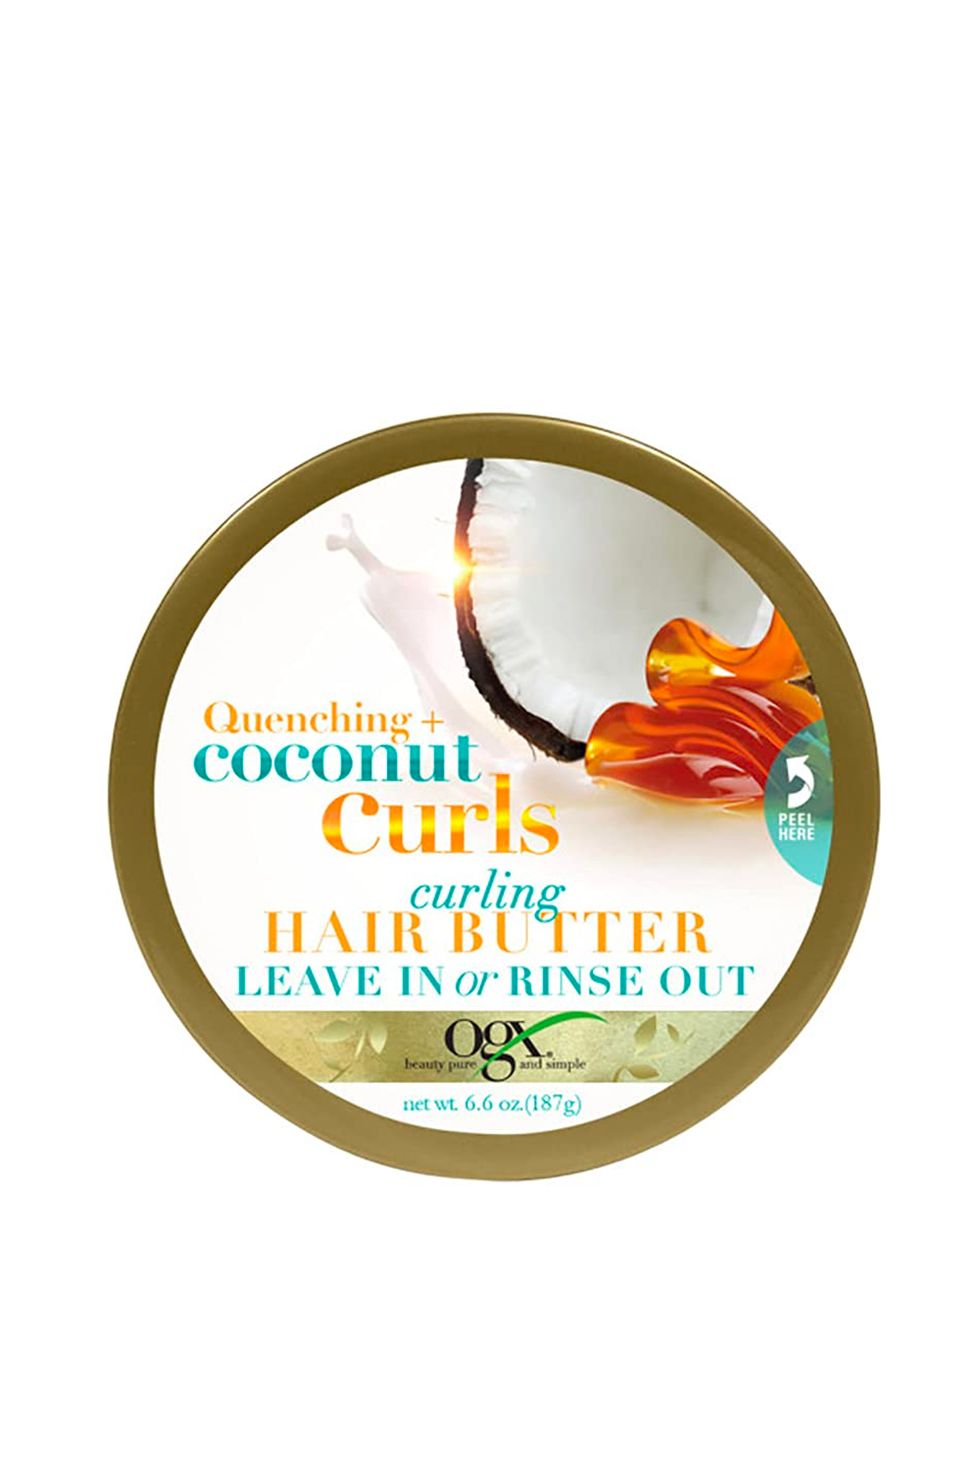 OGX Quenching Coconut Curls Curling Butter Leave-In or Rinse Out